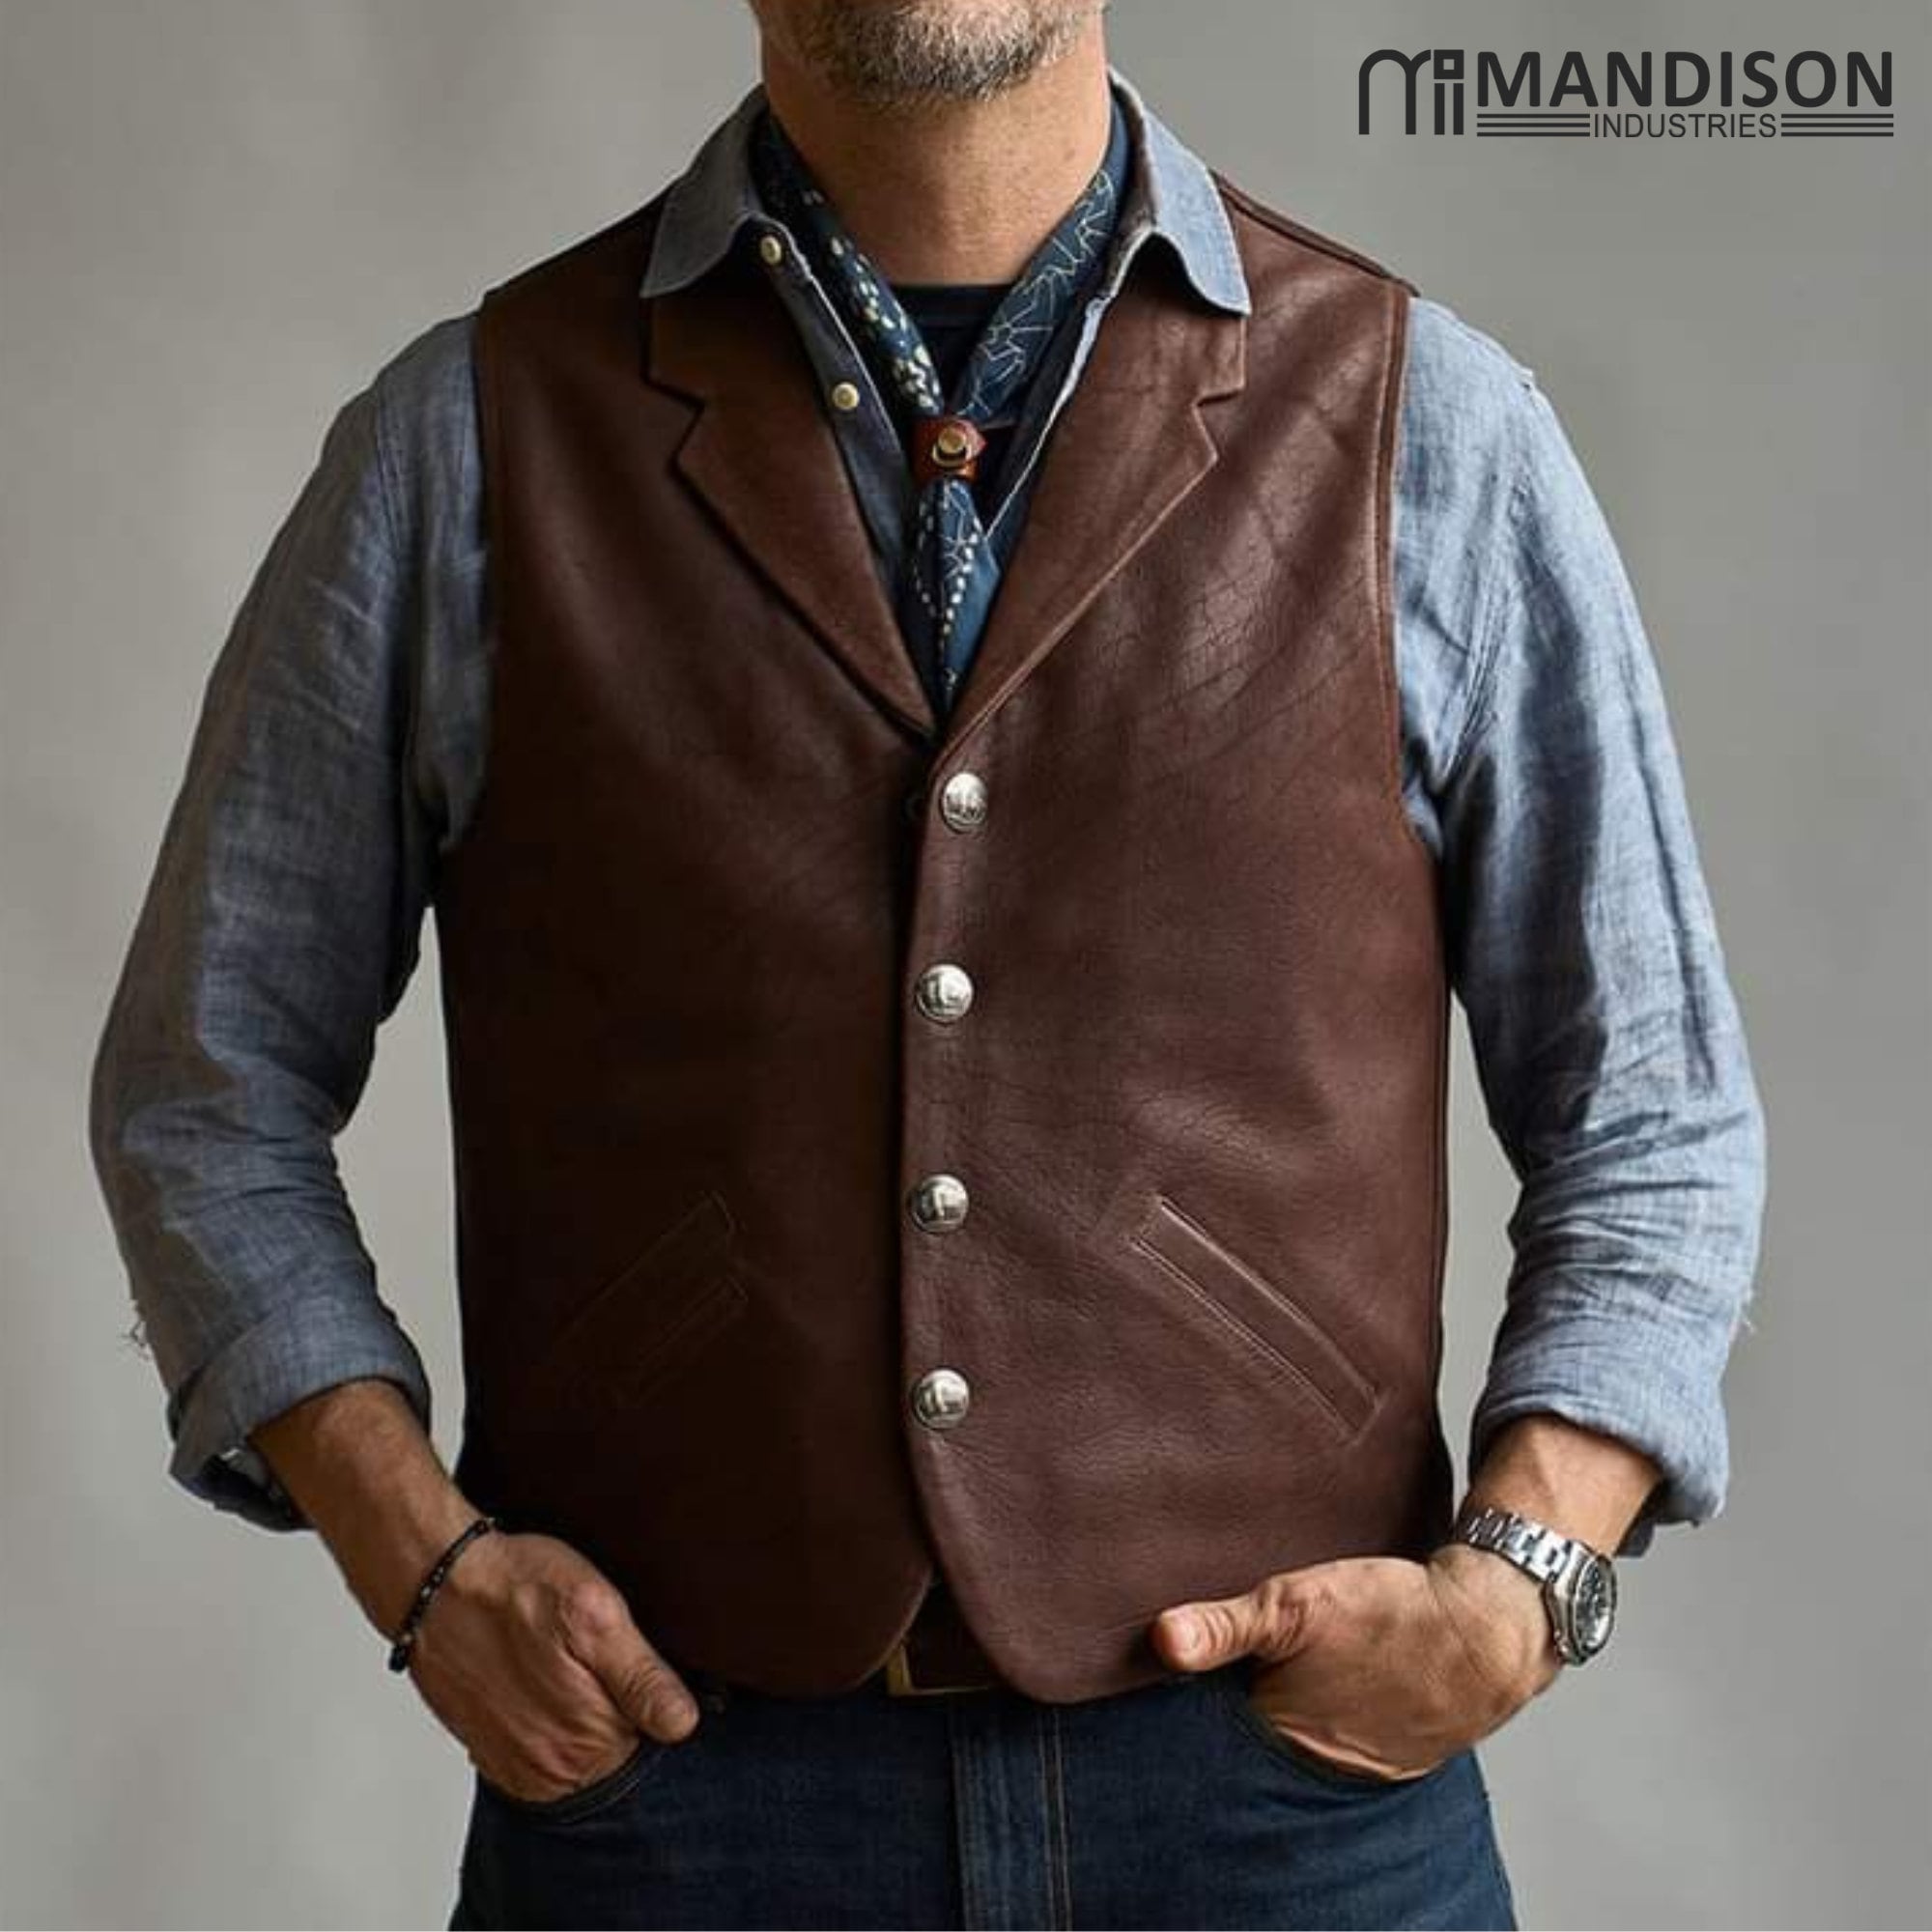 gilet western homme pas cher